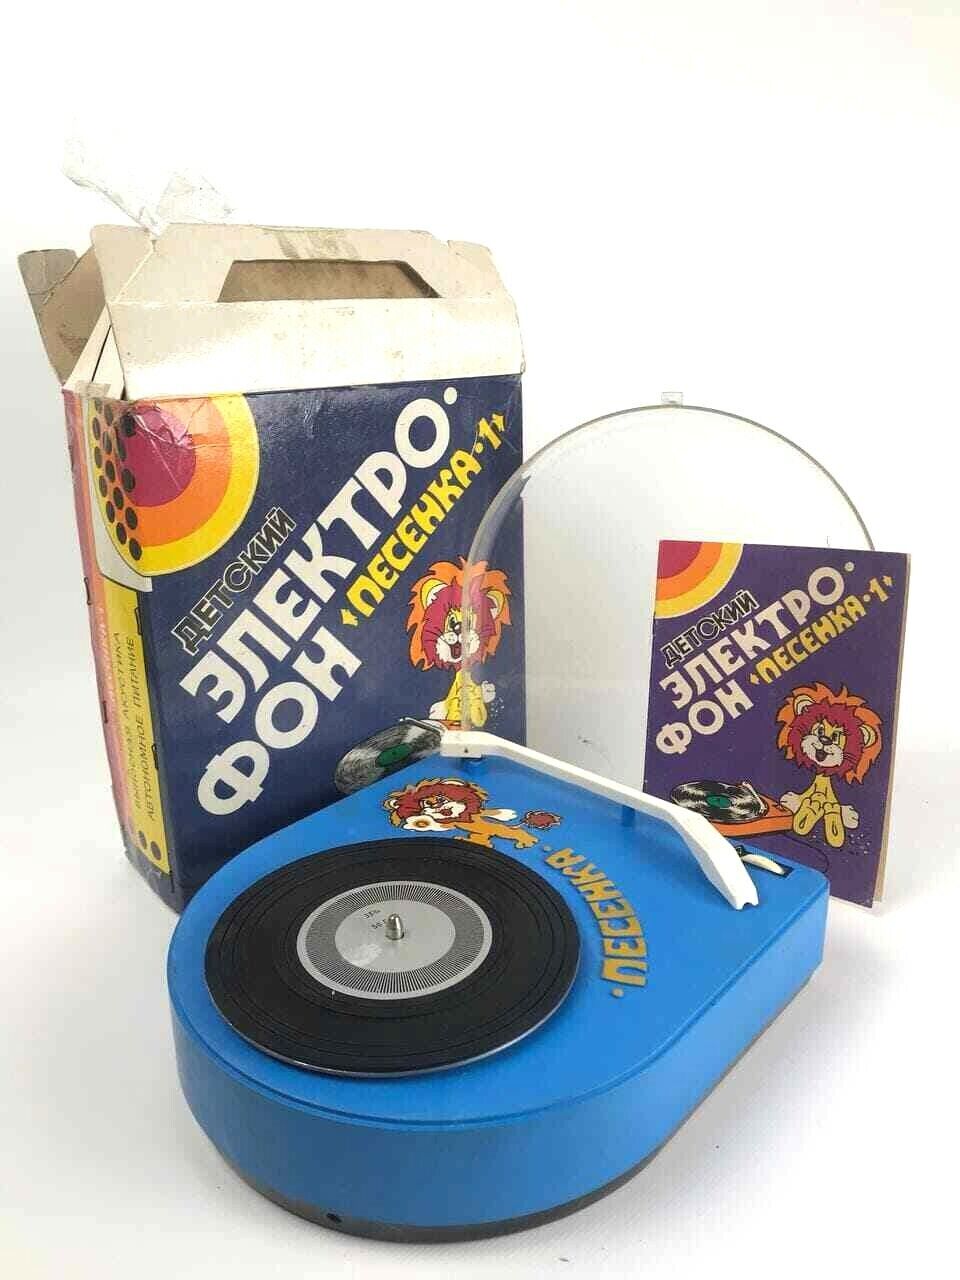 Vintage soviet toy portable baby electrophone turntable vinyl player Song-1